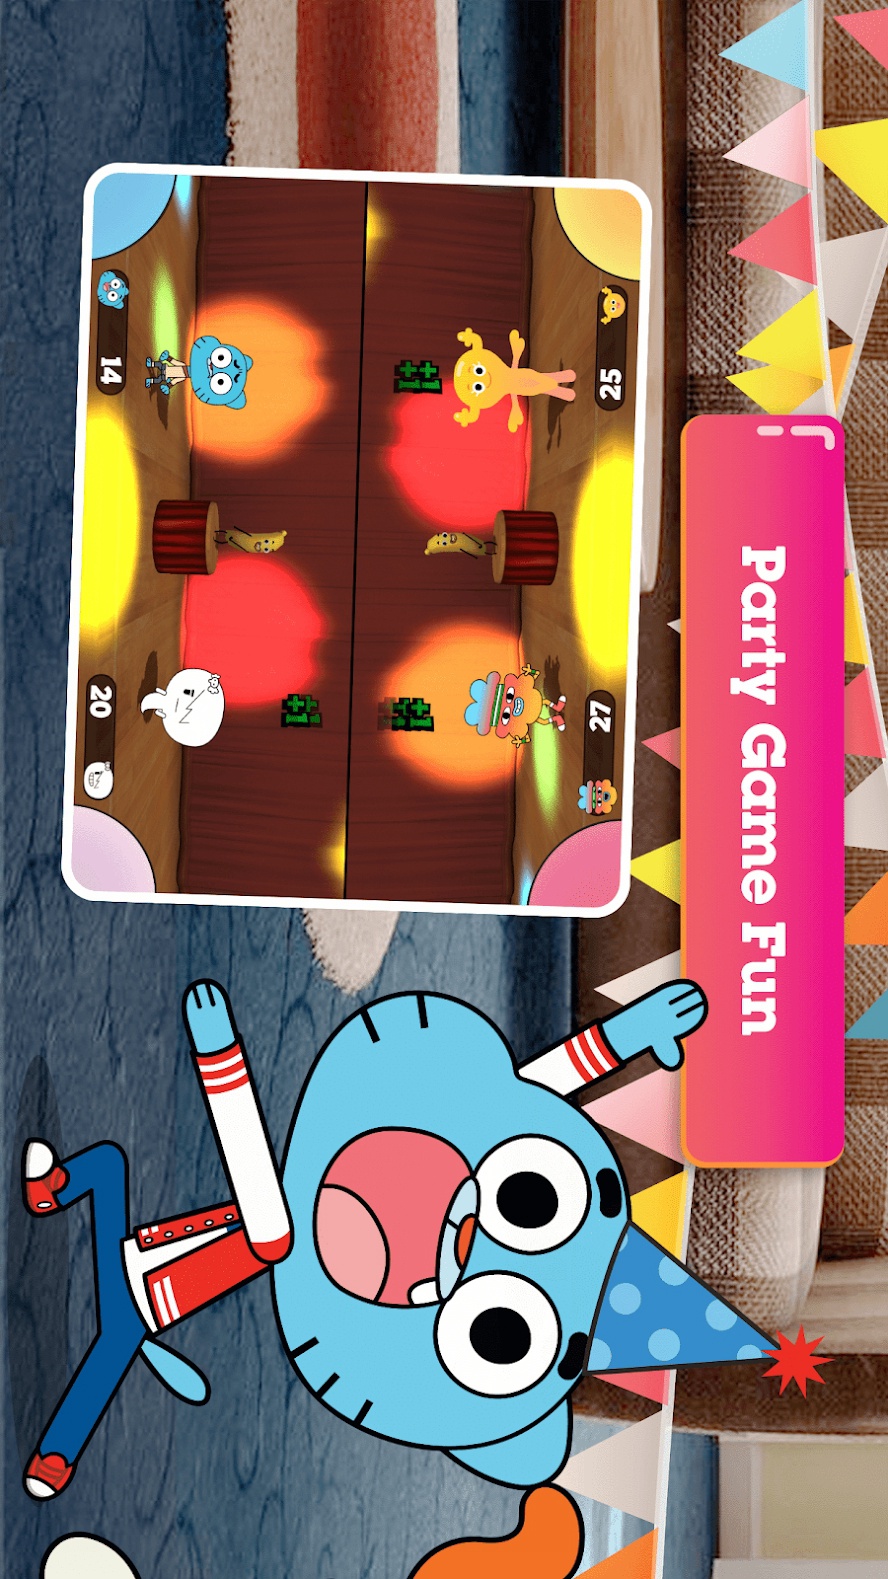 Gumball\'s Amazing Party Game(Paid games to play for free)